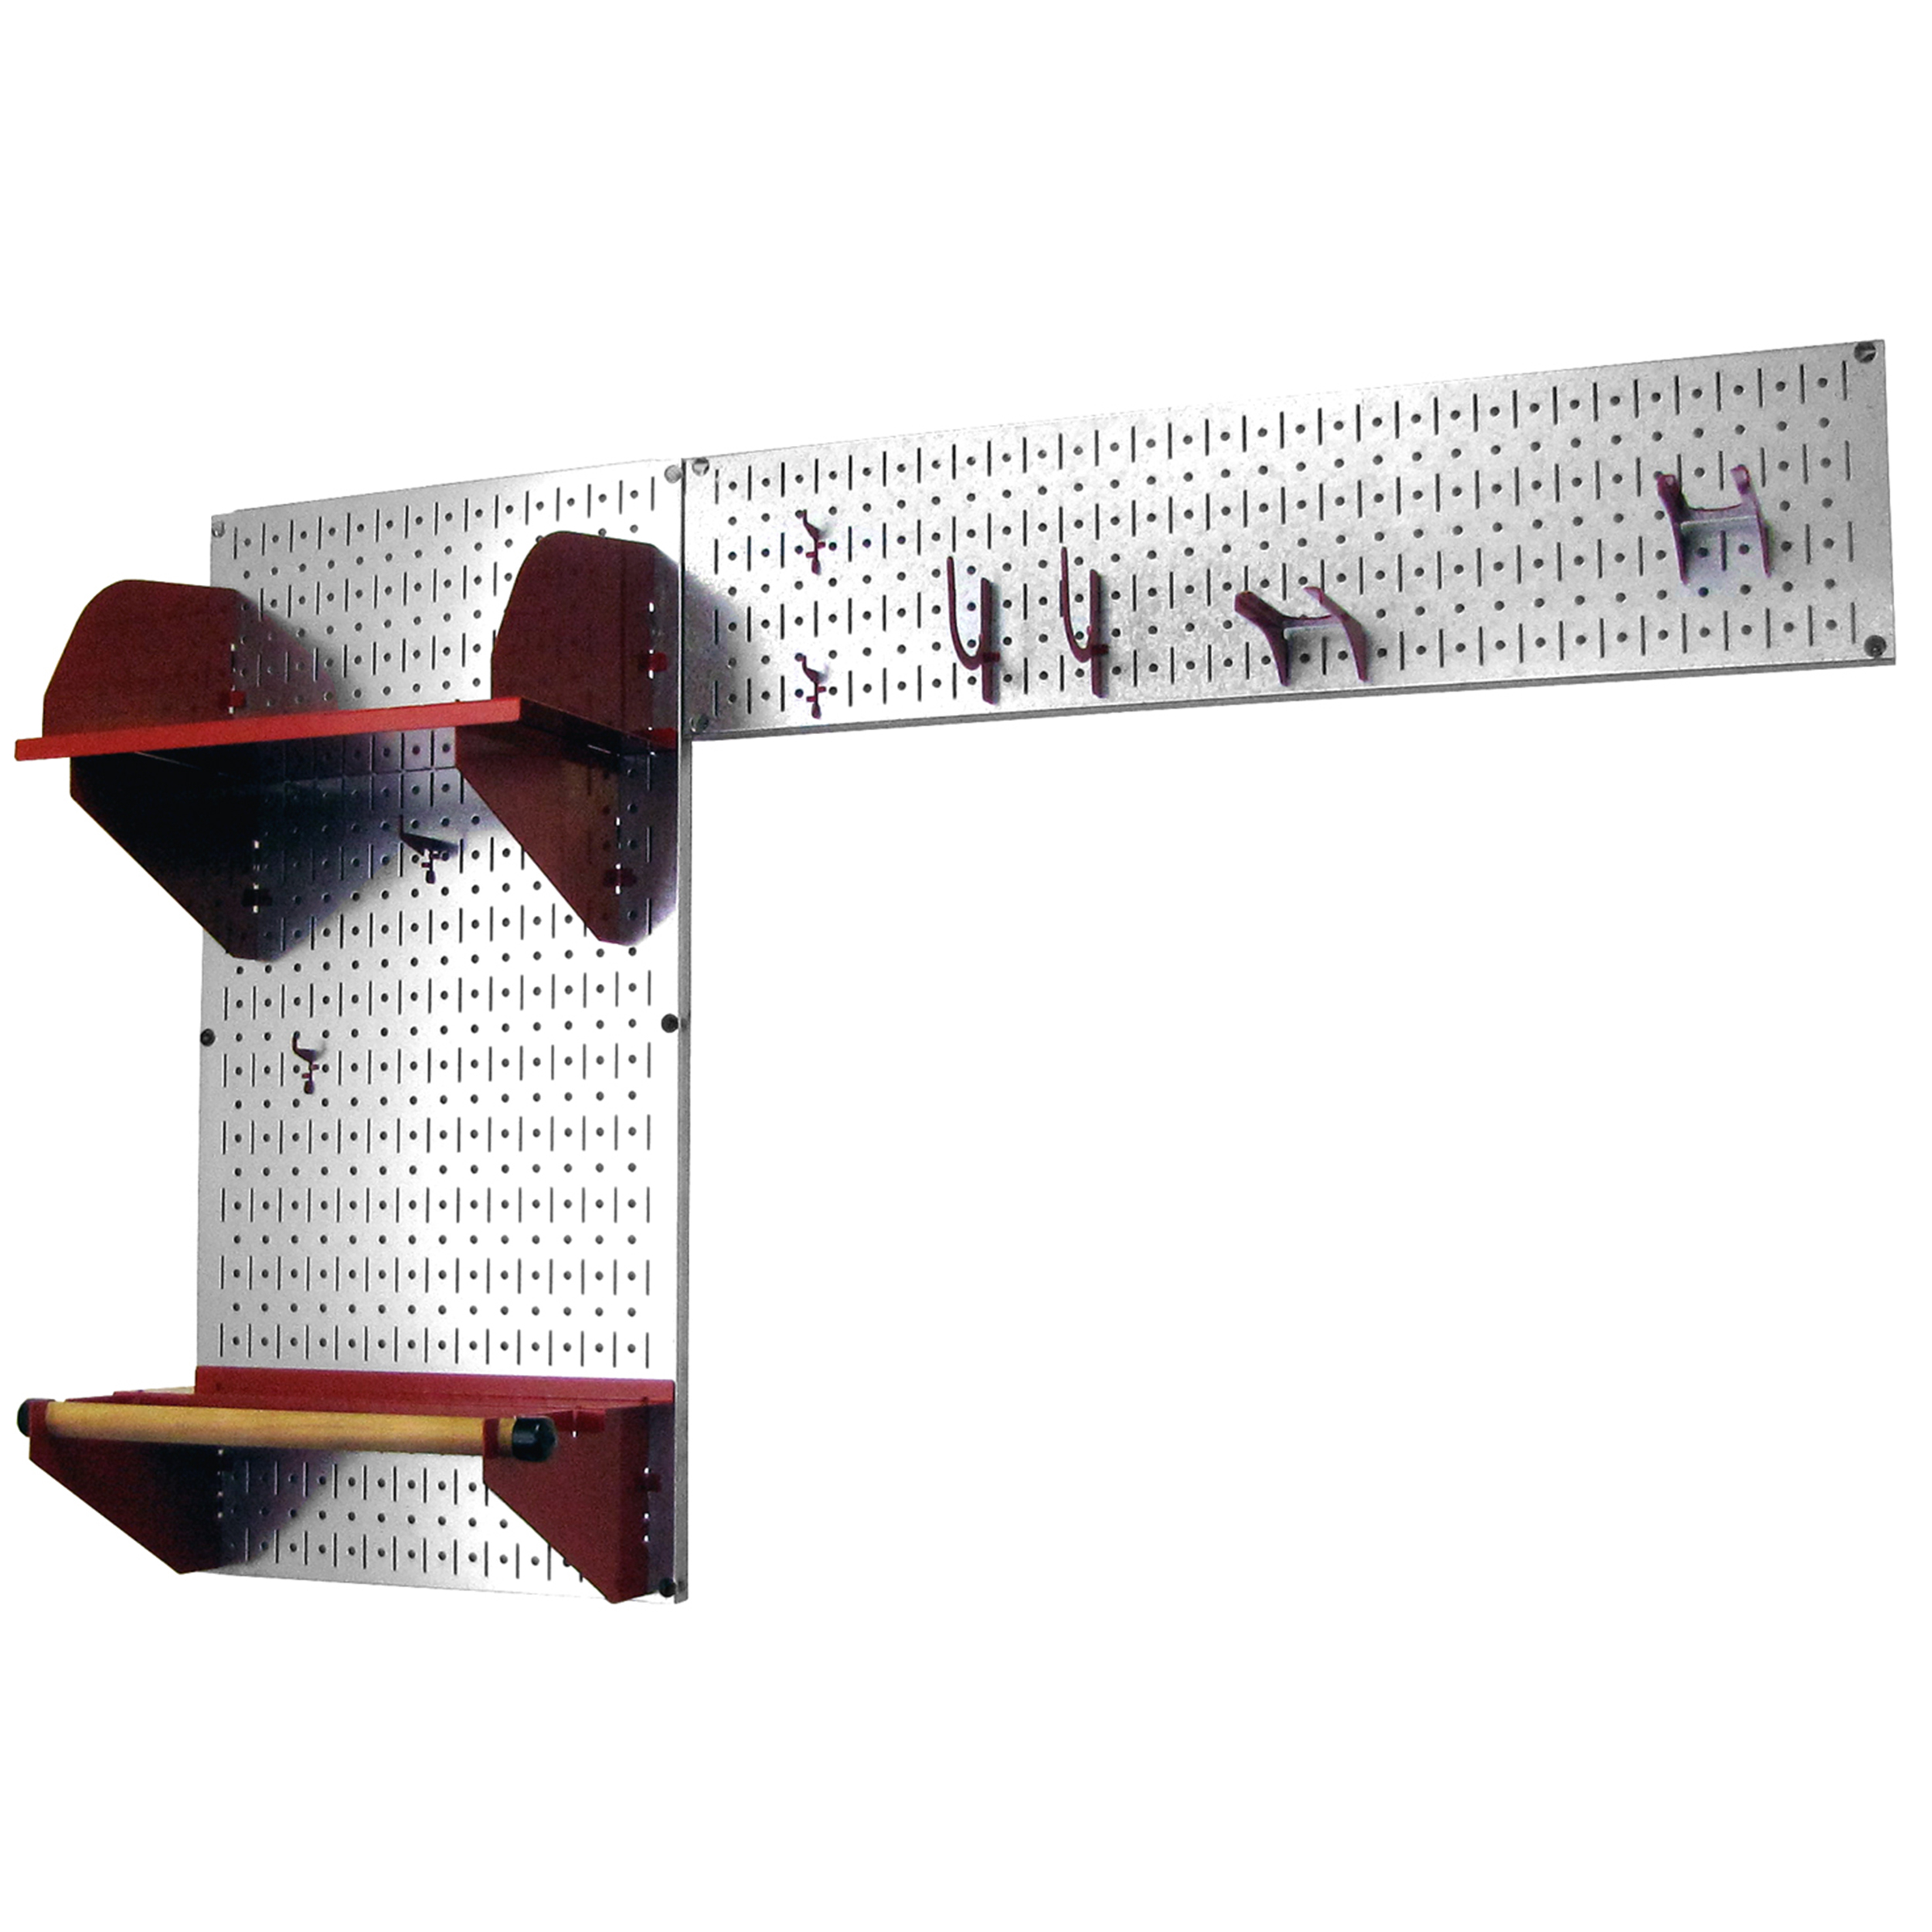 Pegboard Garden Tool Board Organizer With Metallic Pegboard And Red Accessories